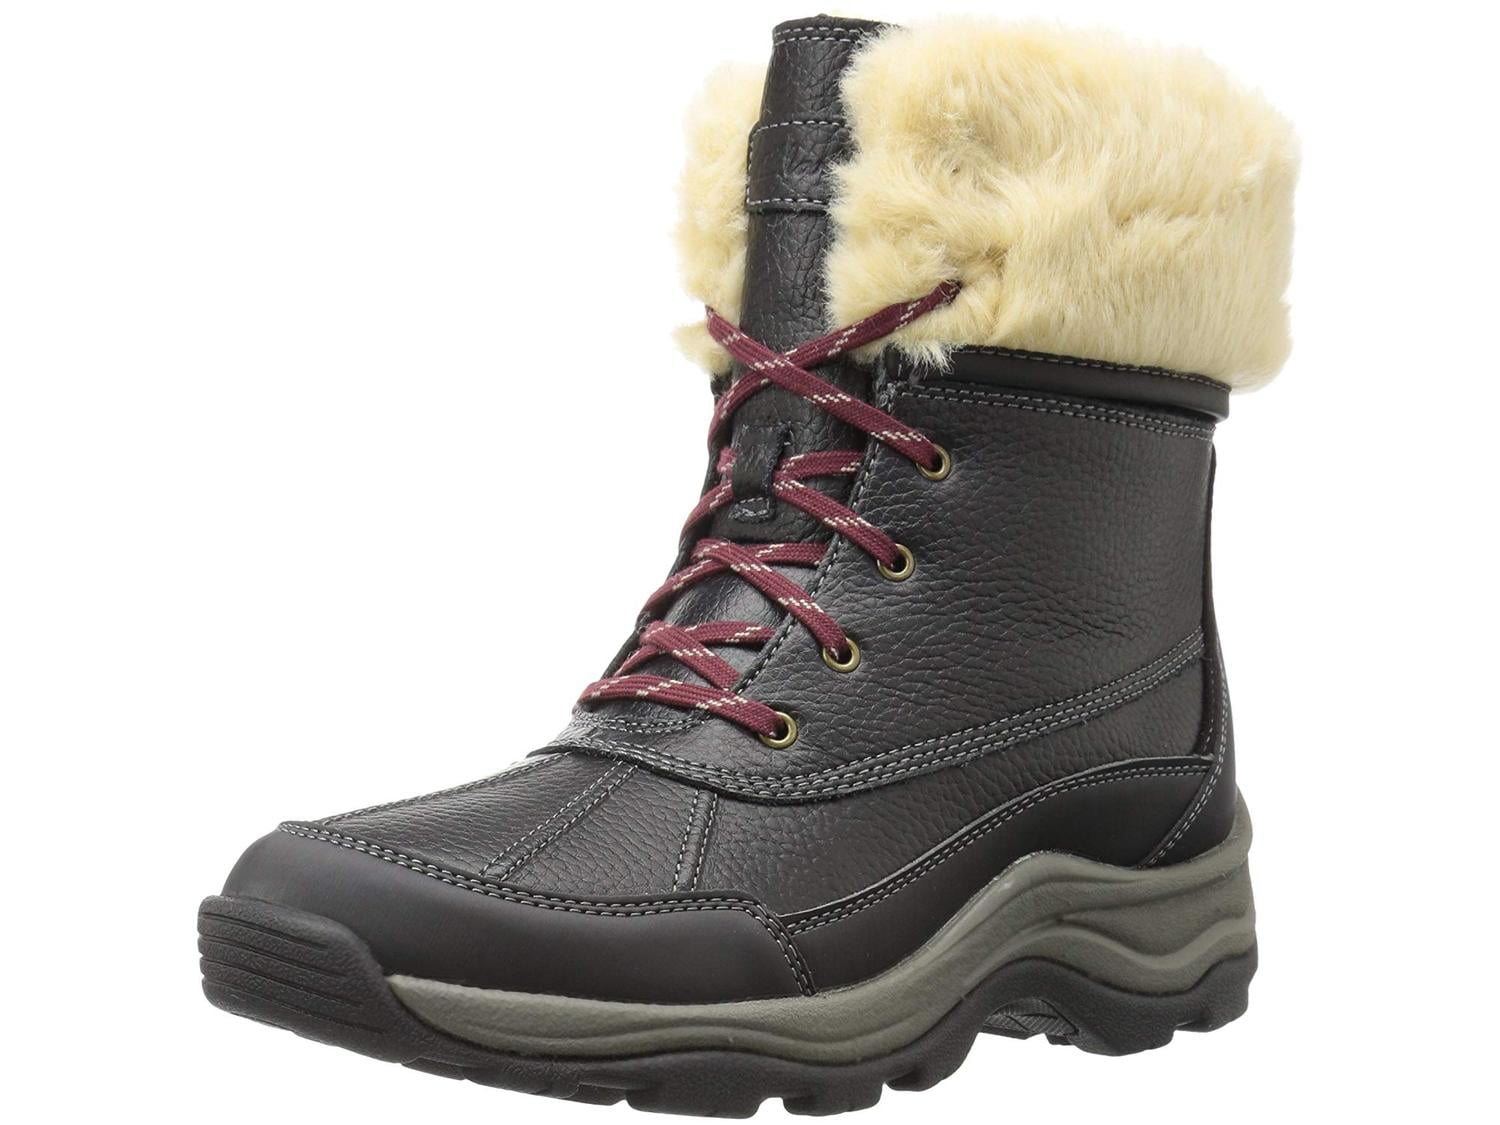 clarks winter boots canada